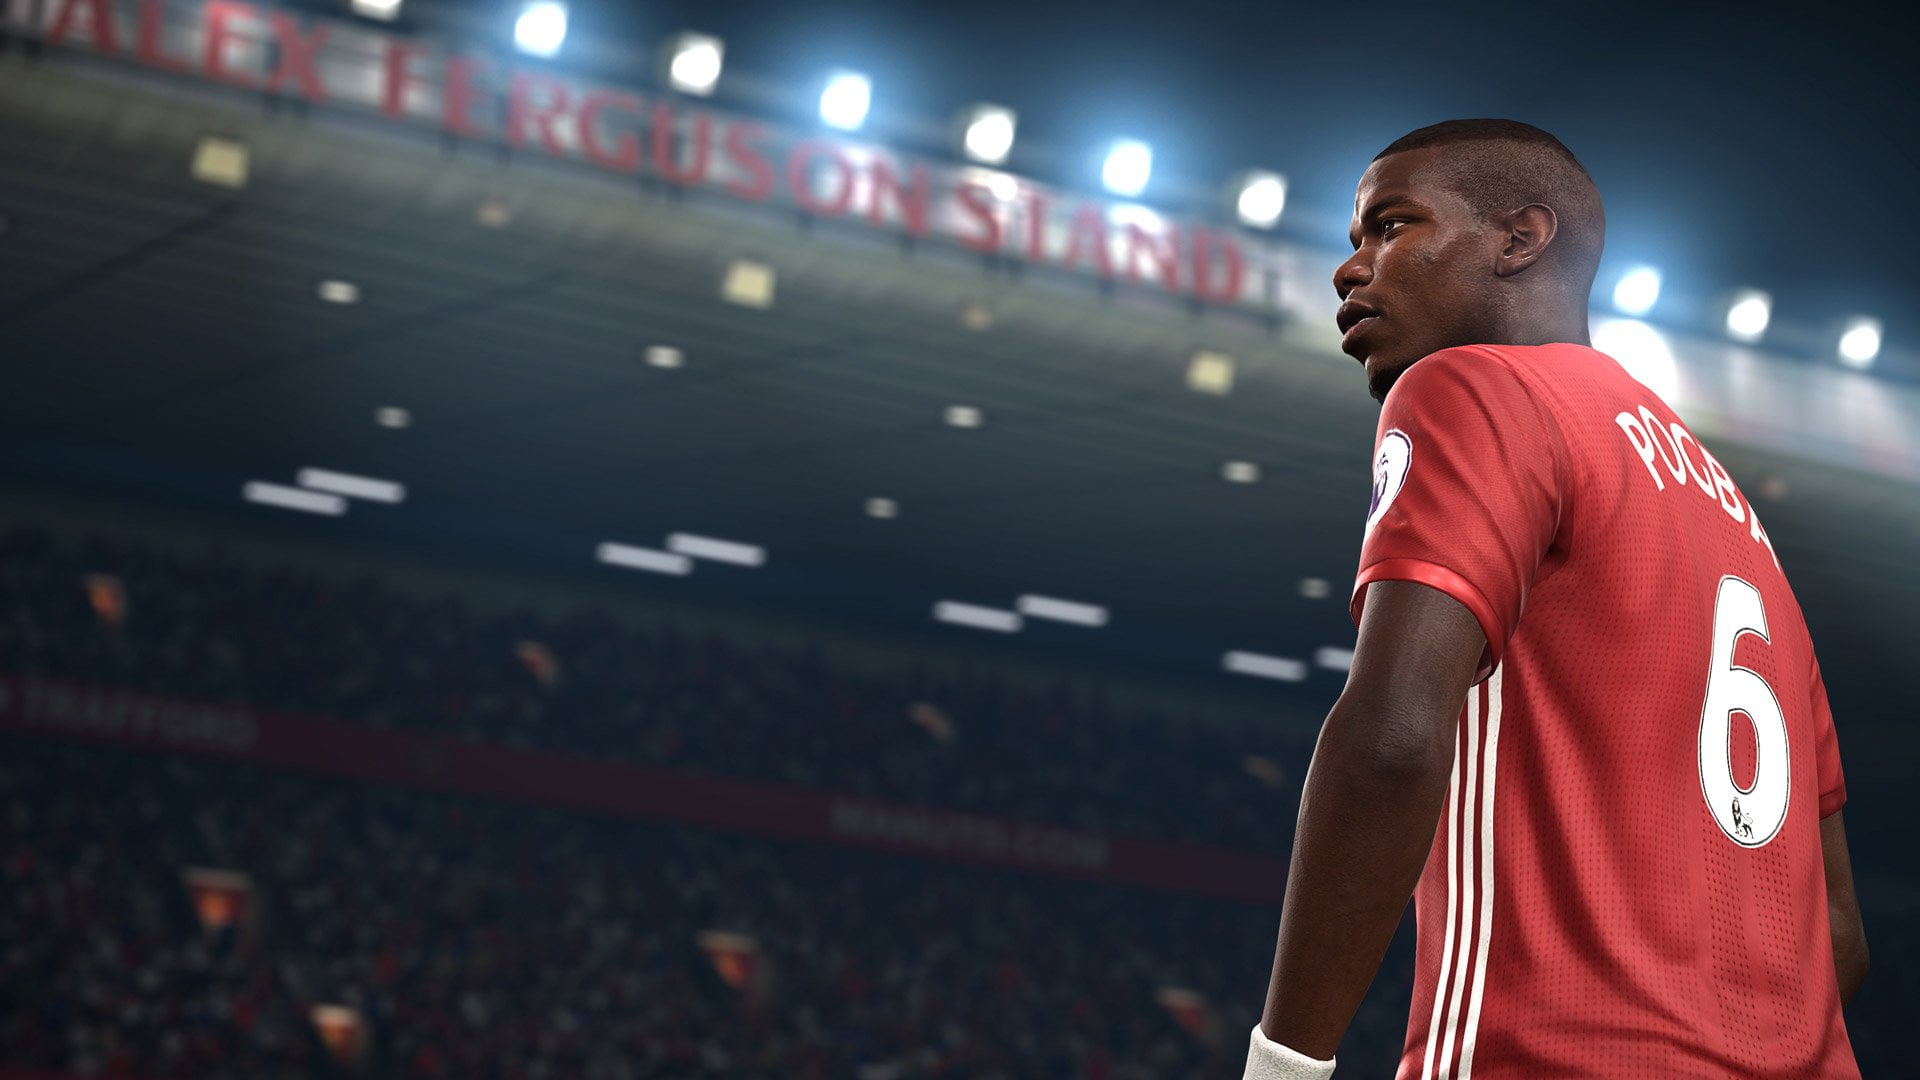 Video games wallpaper, FIFA, soccer, Paul Pogba, men's red and white jersey shirt